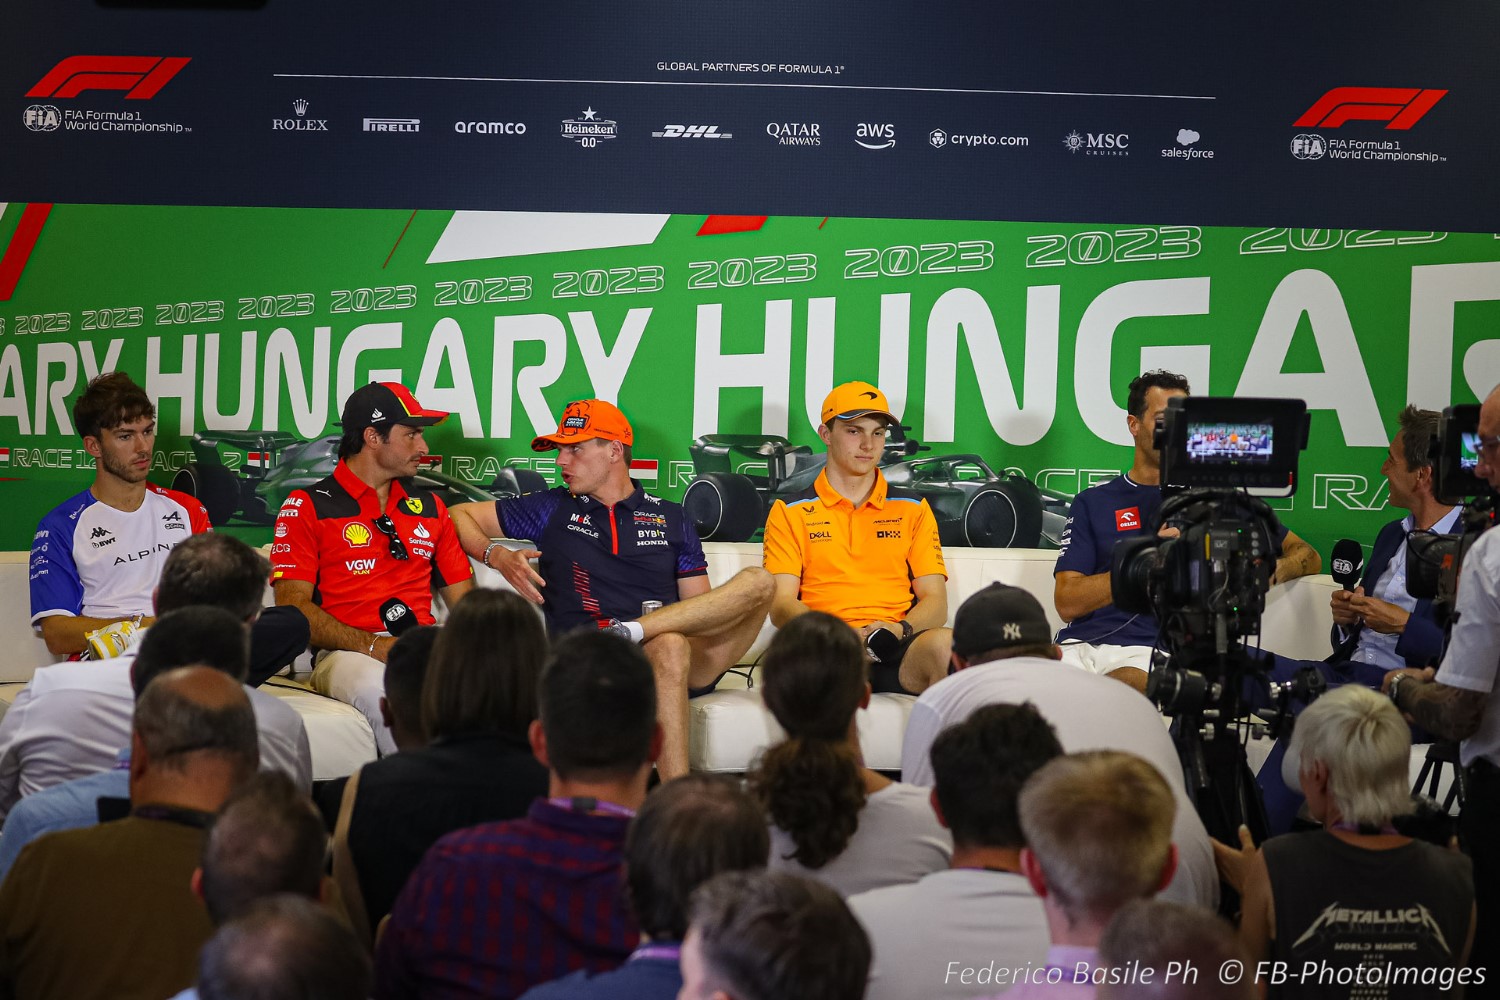 Press conference during the Hungarian GP, Budapest 20-23 July 2023 at the Hungaroring, Formula 1 World championship 2023.